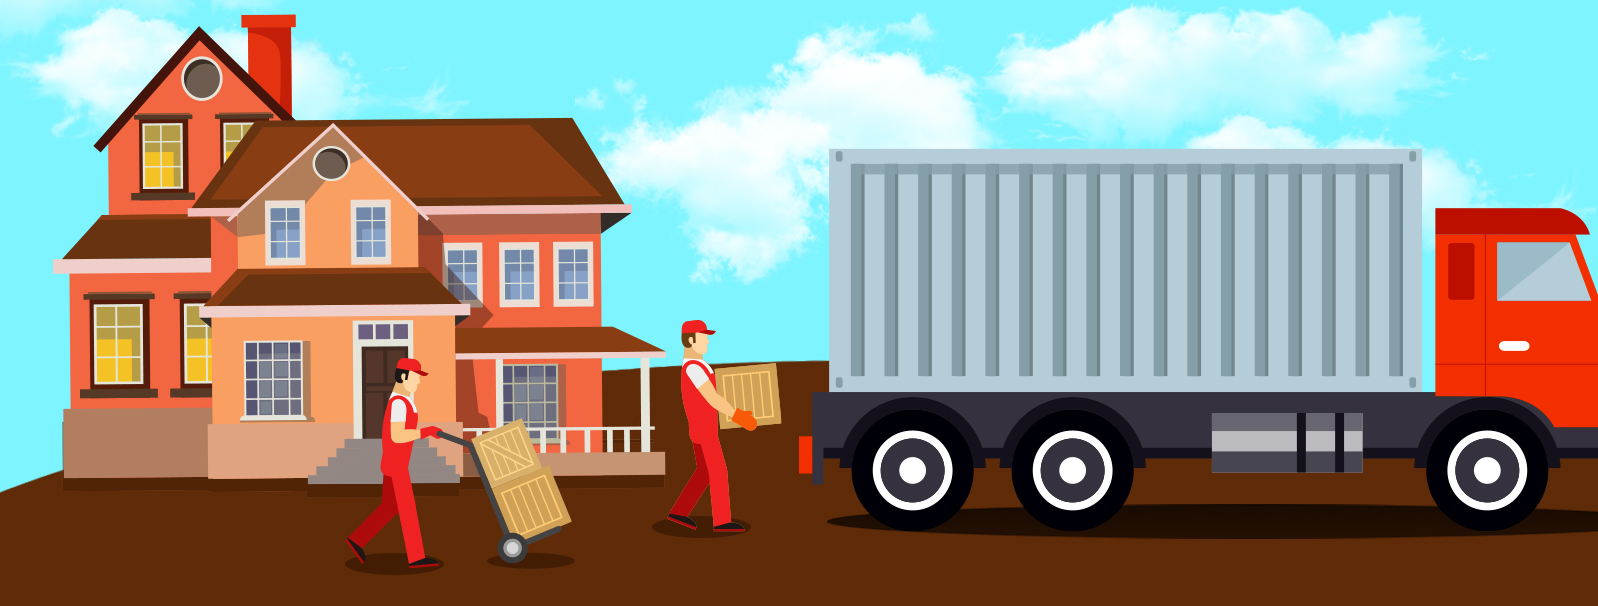 Packers and Movers in Fatehabad,  Trusted Packers Movers in Fatehabad Haryana